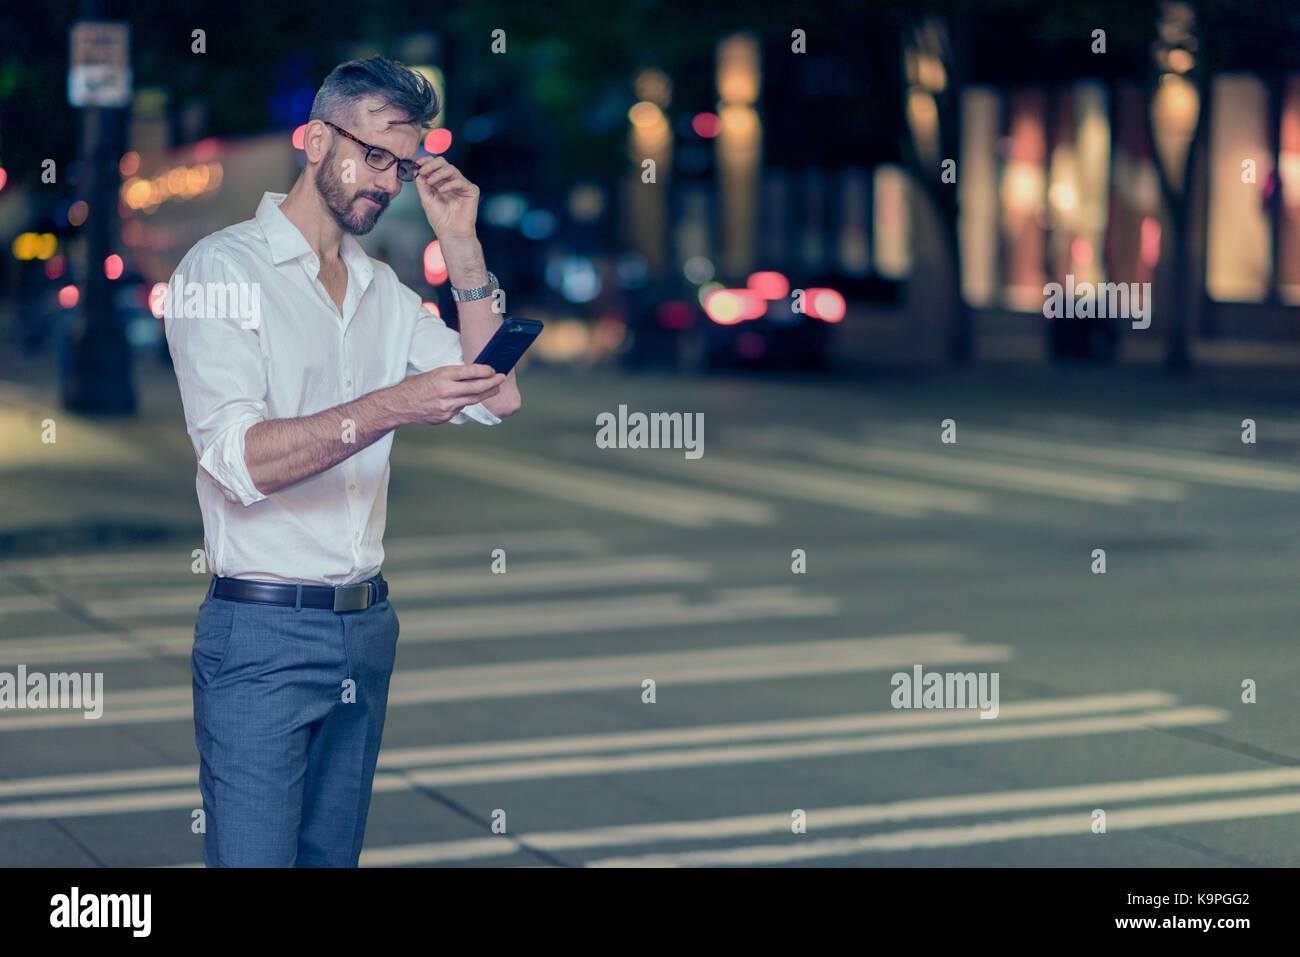 Handsome caucasian male professional photographed on the street at night looking at mobile phone standing at intersection Stock Photo